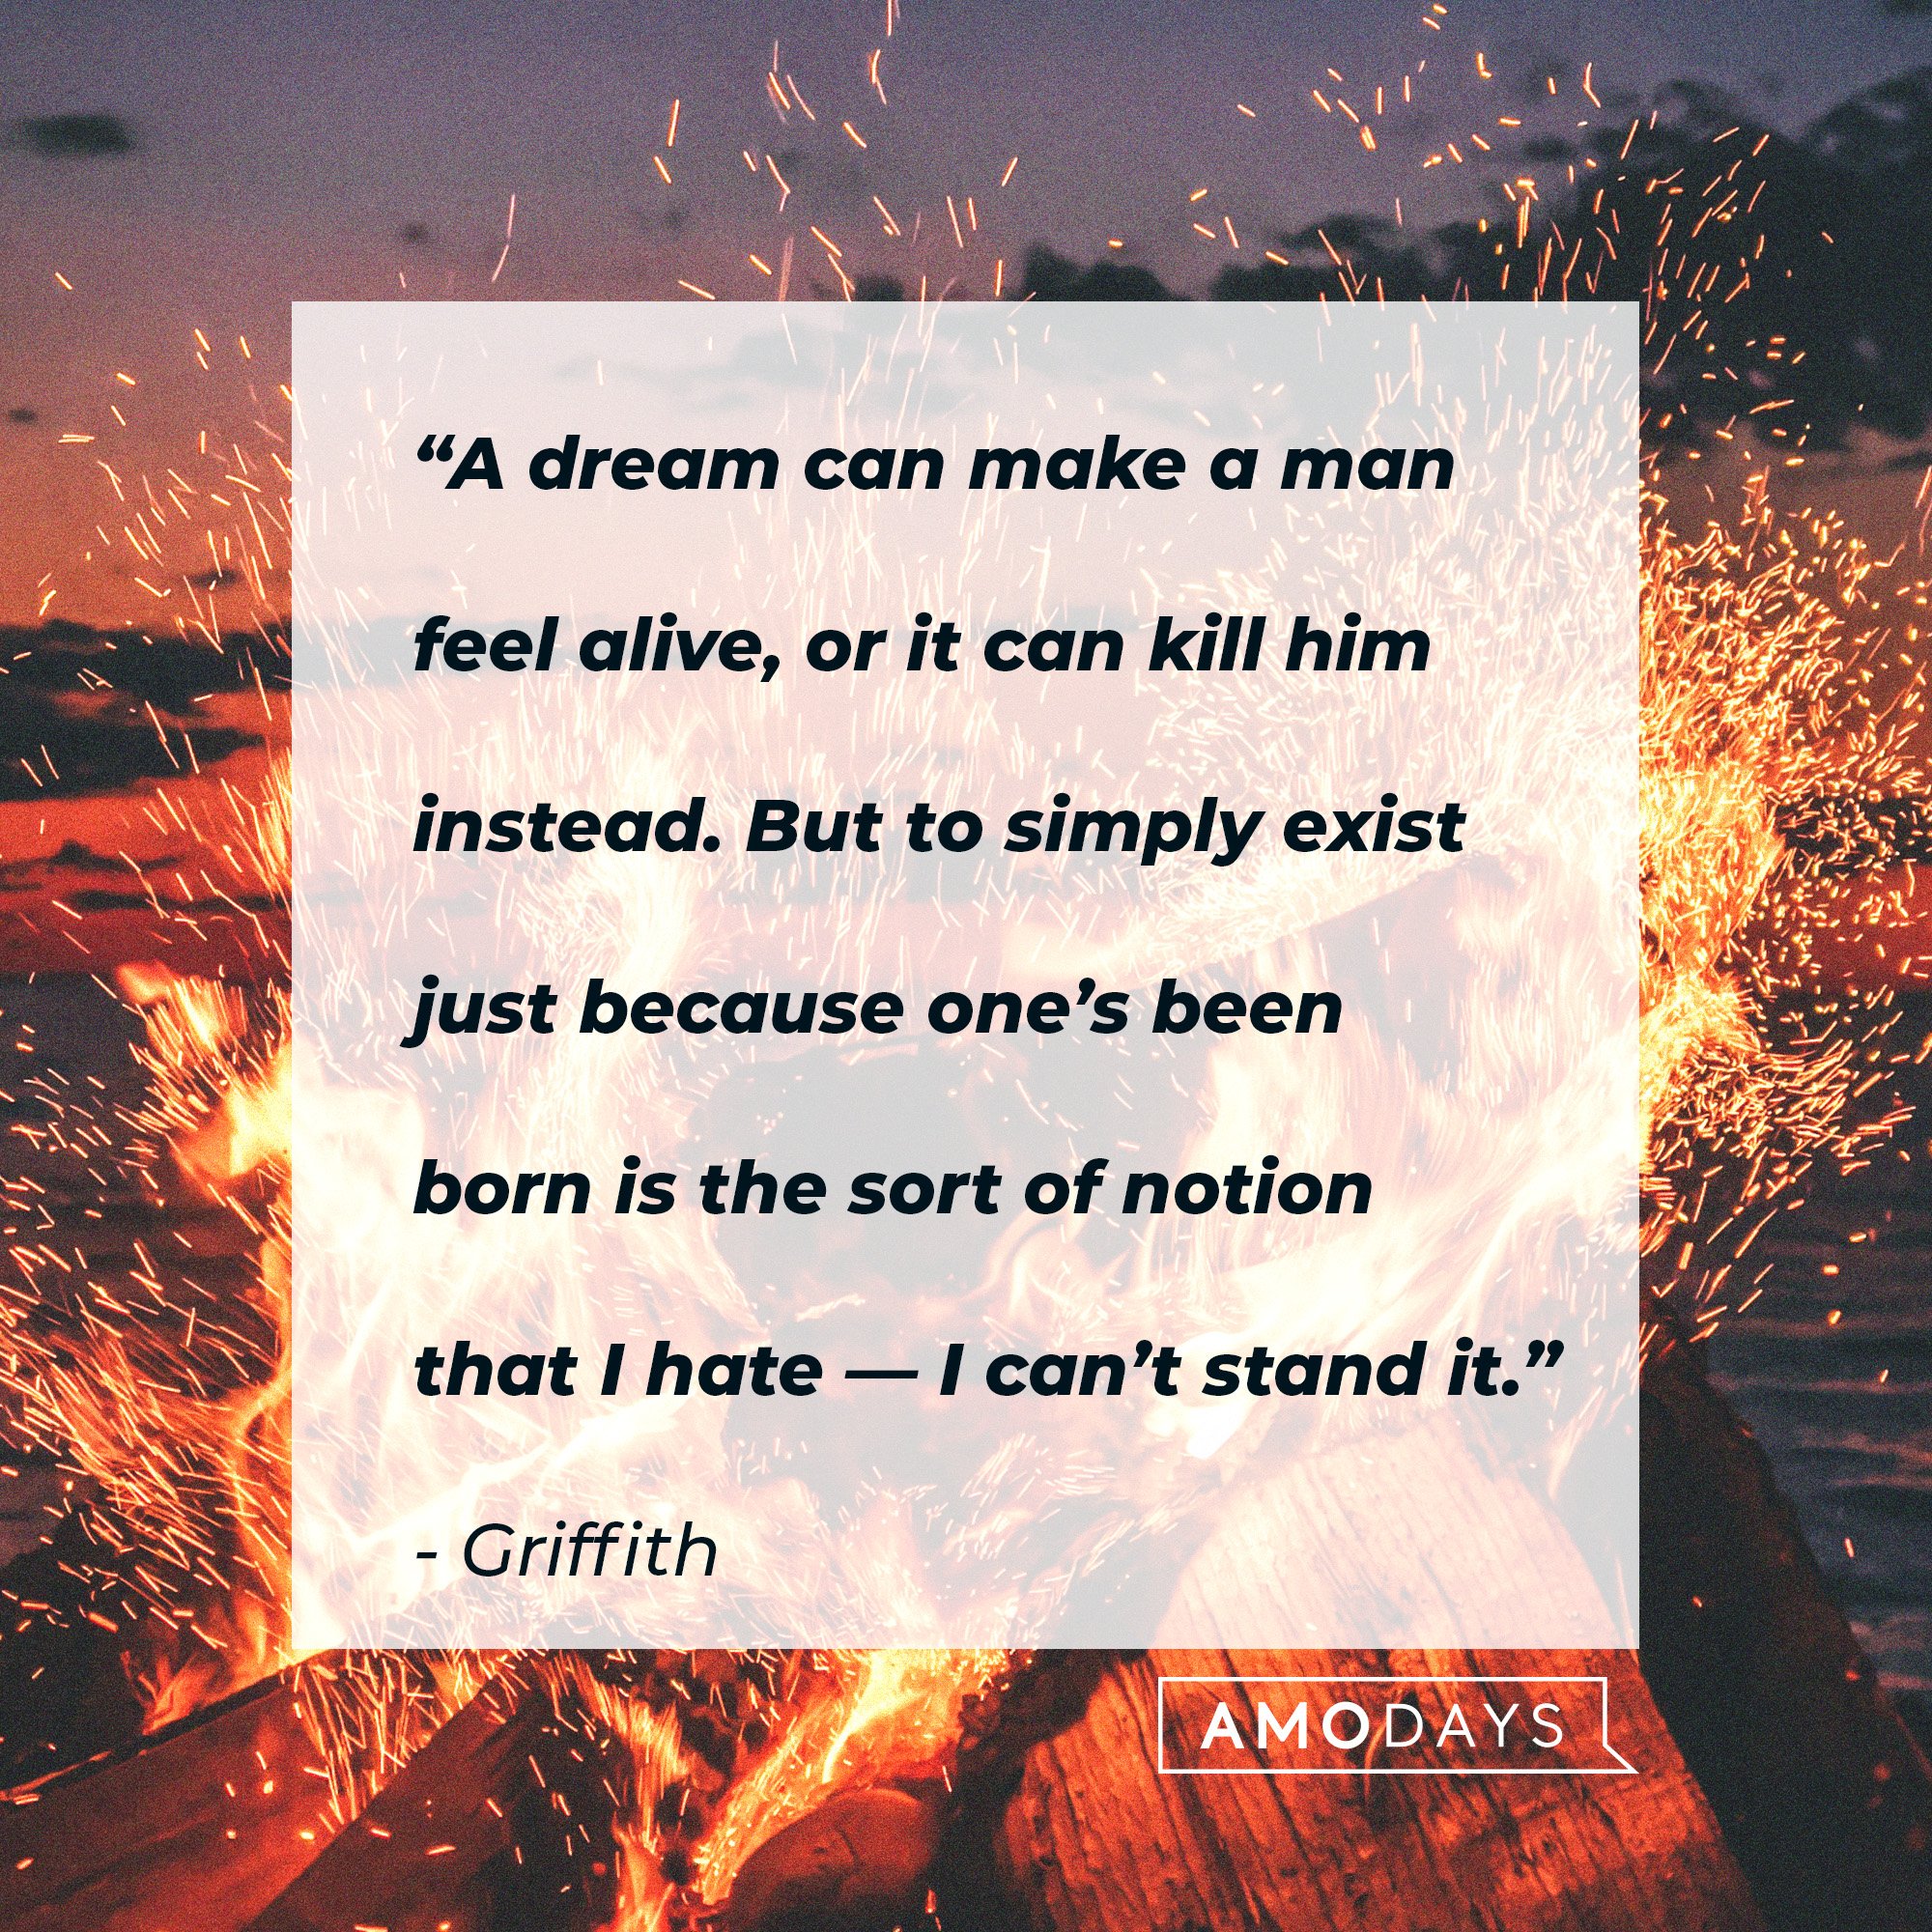 Griffith's quote: “A dream can make a man feel alive, or it can kill him instead. But to simply exist just because one’s been born is the sort of notion that I hate — I can’t stand it.” | Image: AmoDays